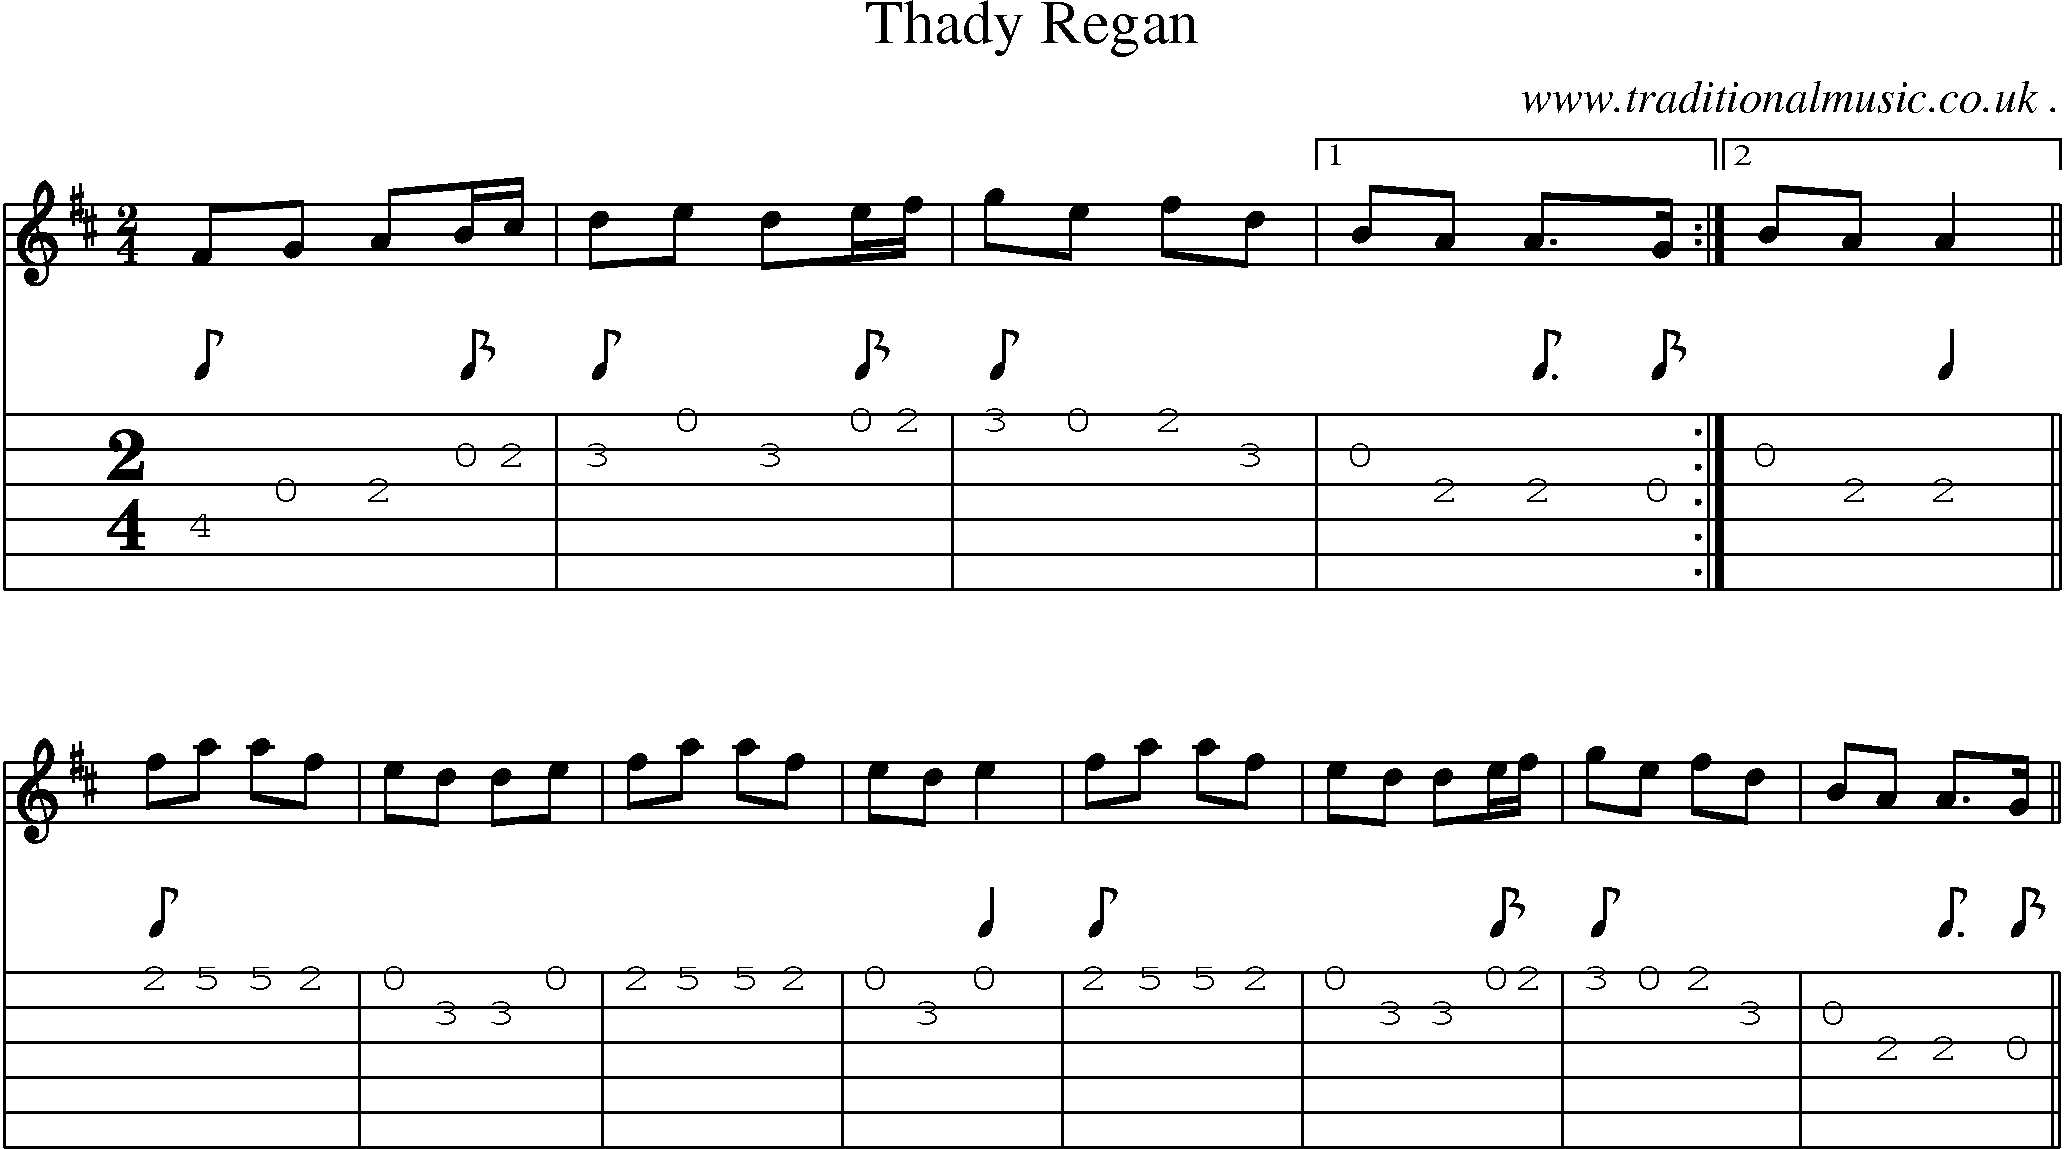 Sheet-Music and Guitar Tabs for Thady Regan